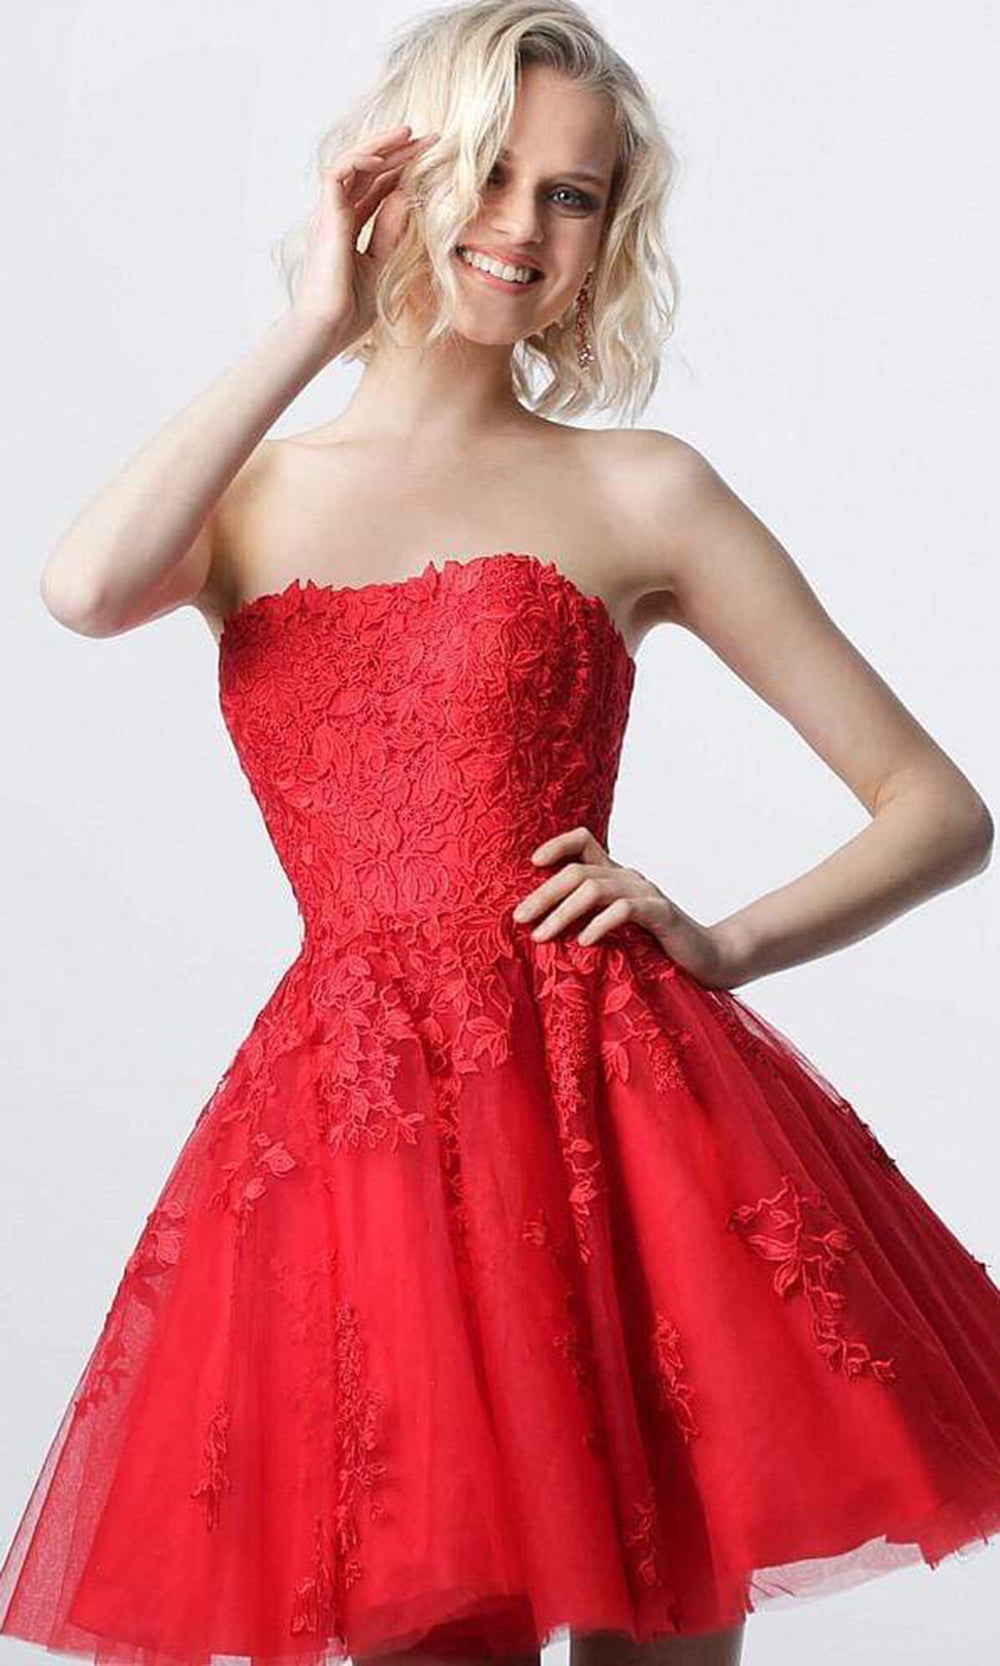 Jovani - Strapless Floral Lace Applique Tulle Cocktail Dress JVN1830 - 2 pcs Red in in Size 2 and 8 Available CCSALE 2 / Red